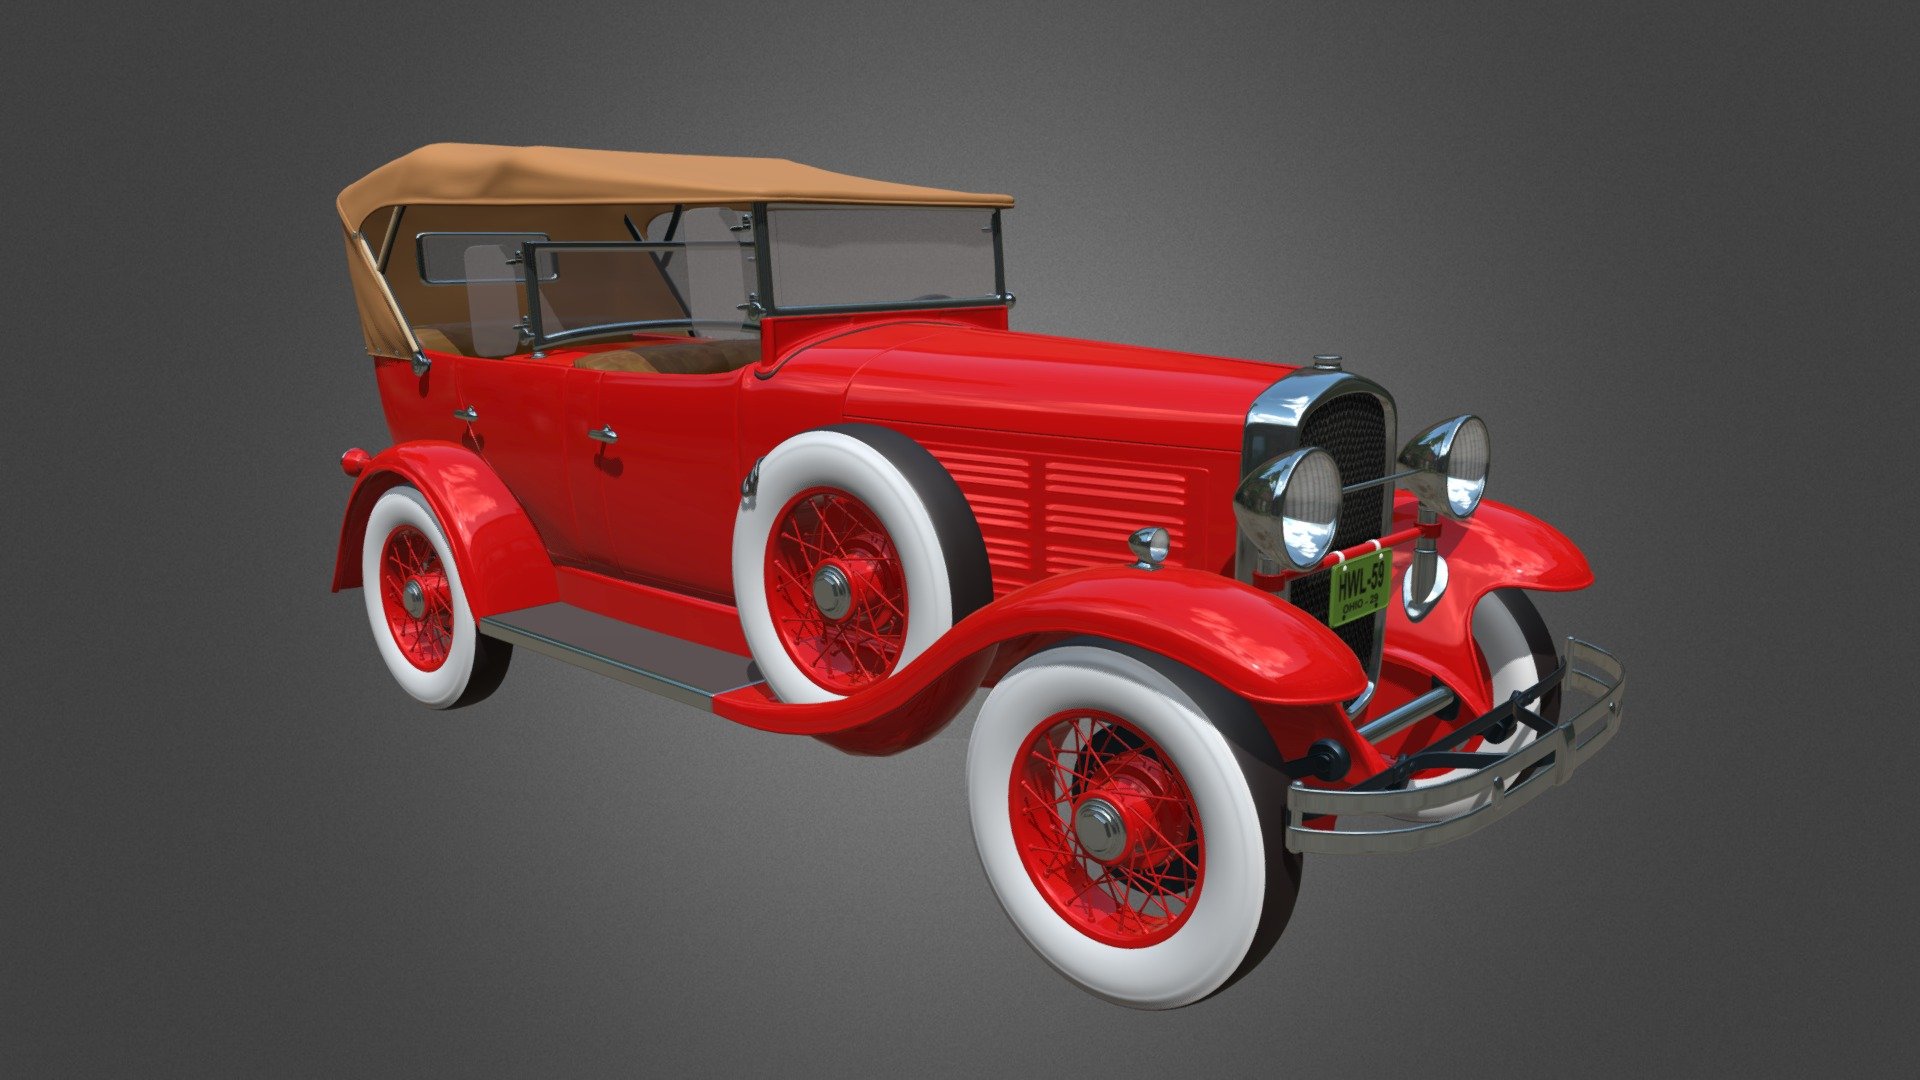 1928 Jordan Speedster made in Cleveland
redid paint job from original 2 tone green and yellow - Automobile old 1929 Jordan Speedster Car - Buy Royalty Free 3D model by hwlewis 3d model